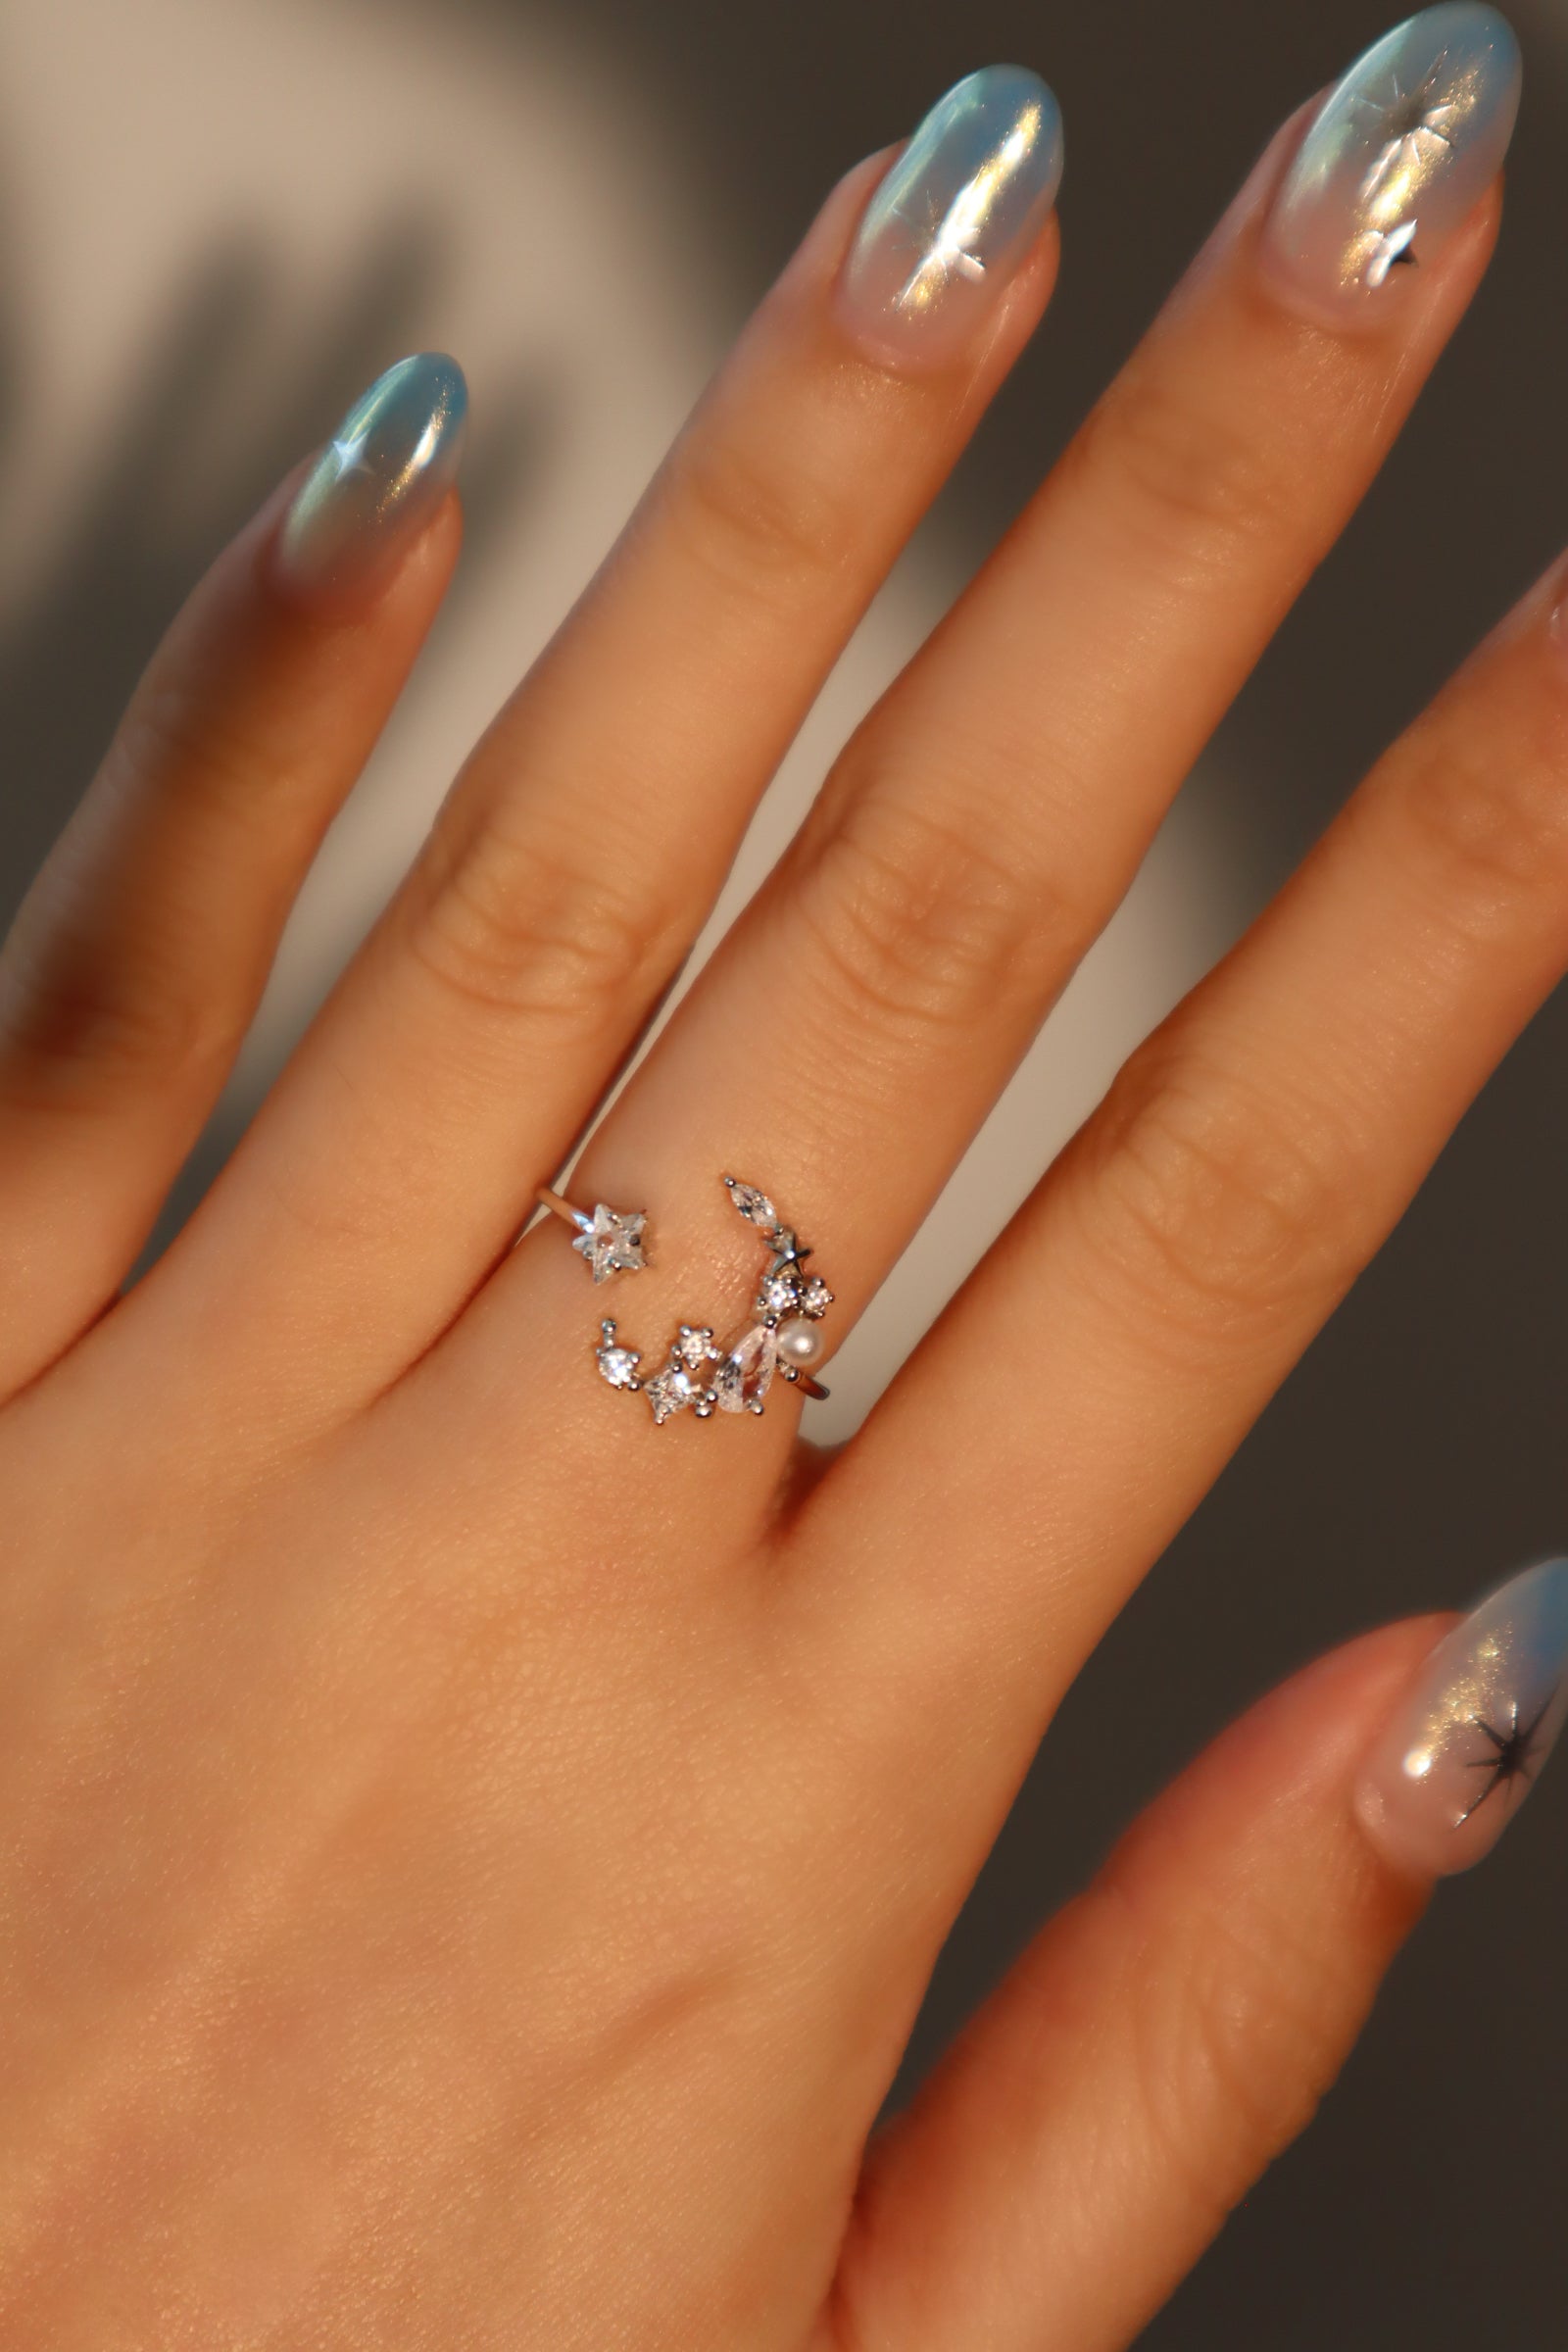 925 Sterling Silver Moon Star Ring